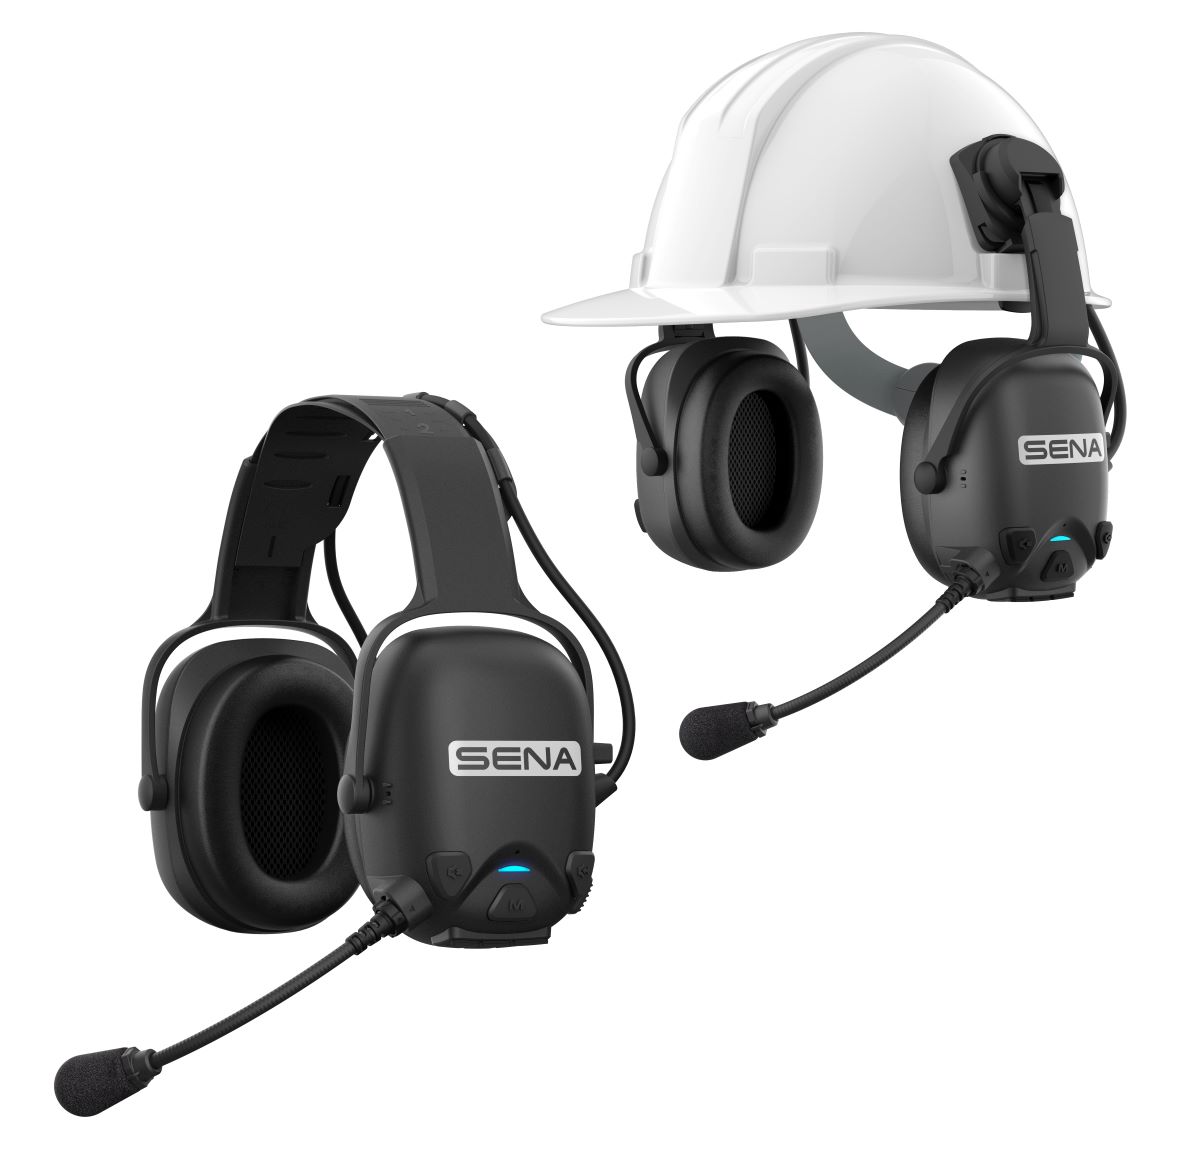 Introducing Sena's most robust industrial communication headset